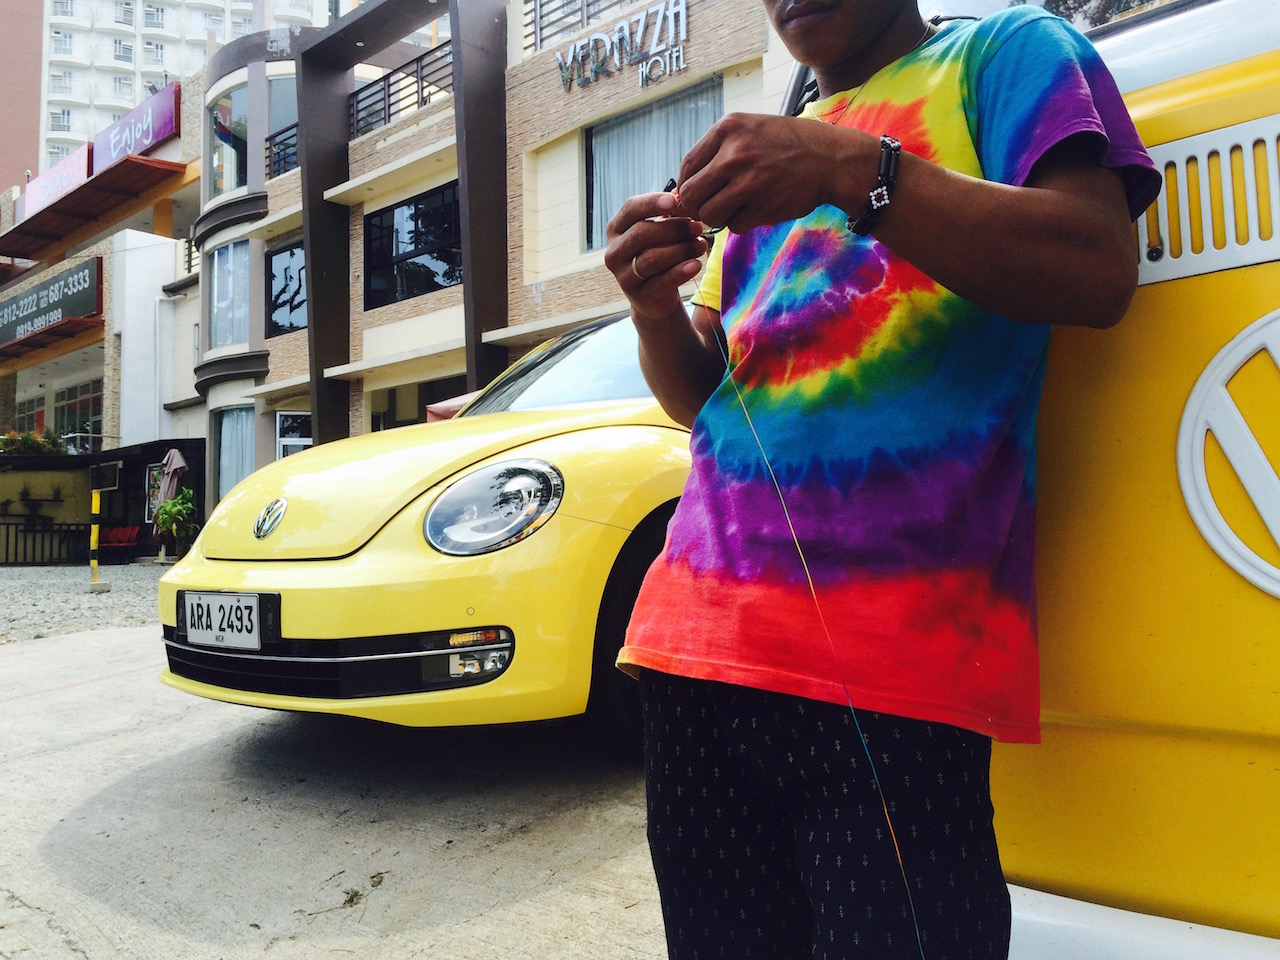 Catching the bug:  A Lifestyle Journey with Volkswagen’s Beetle